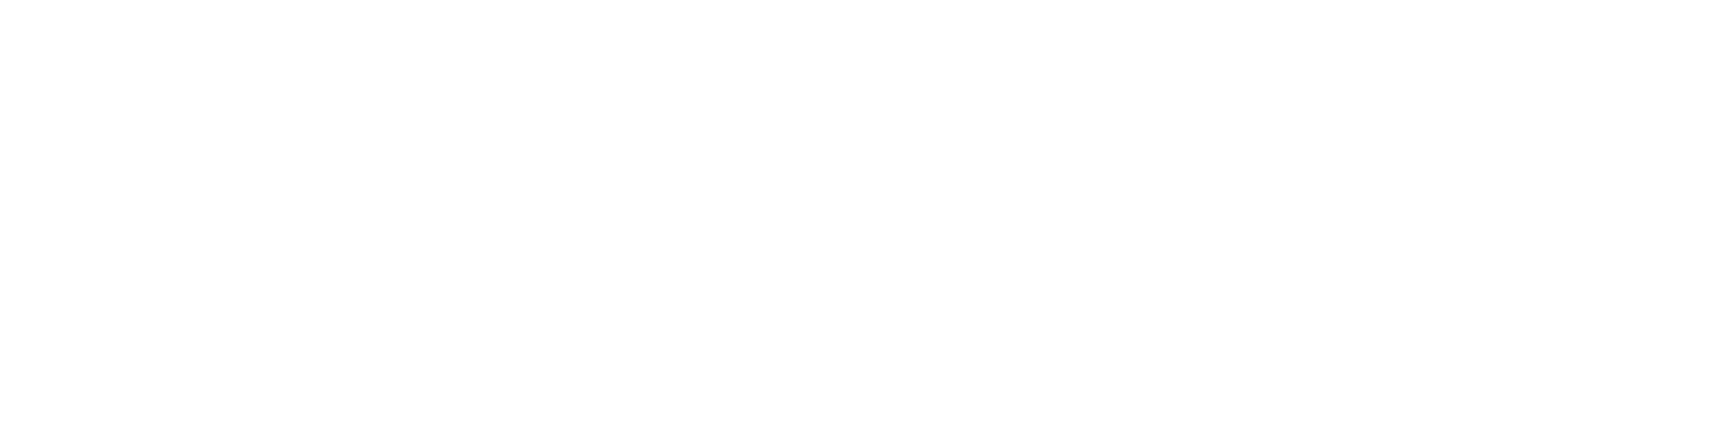 spaceapps-white